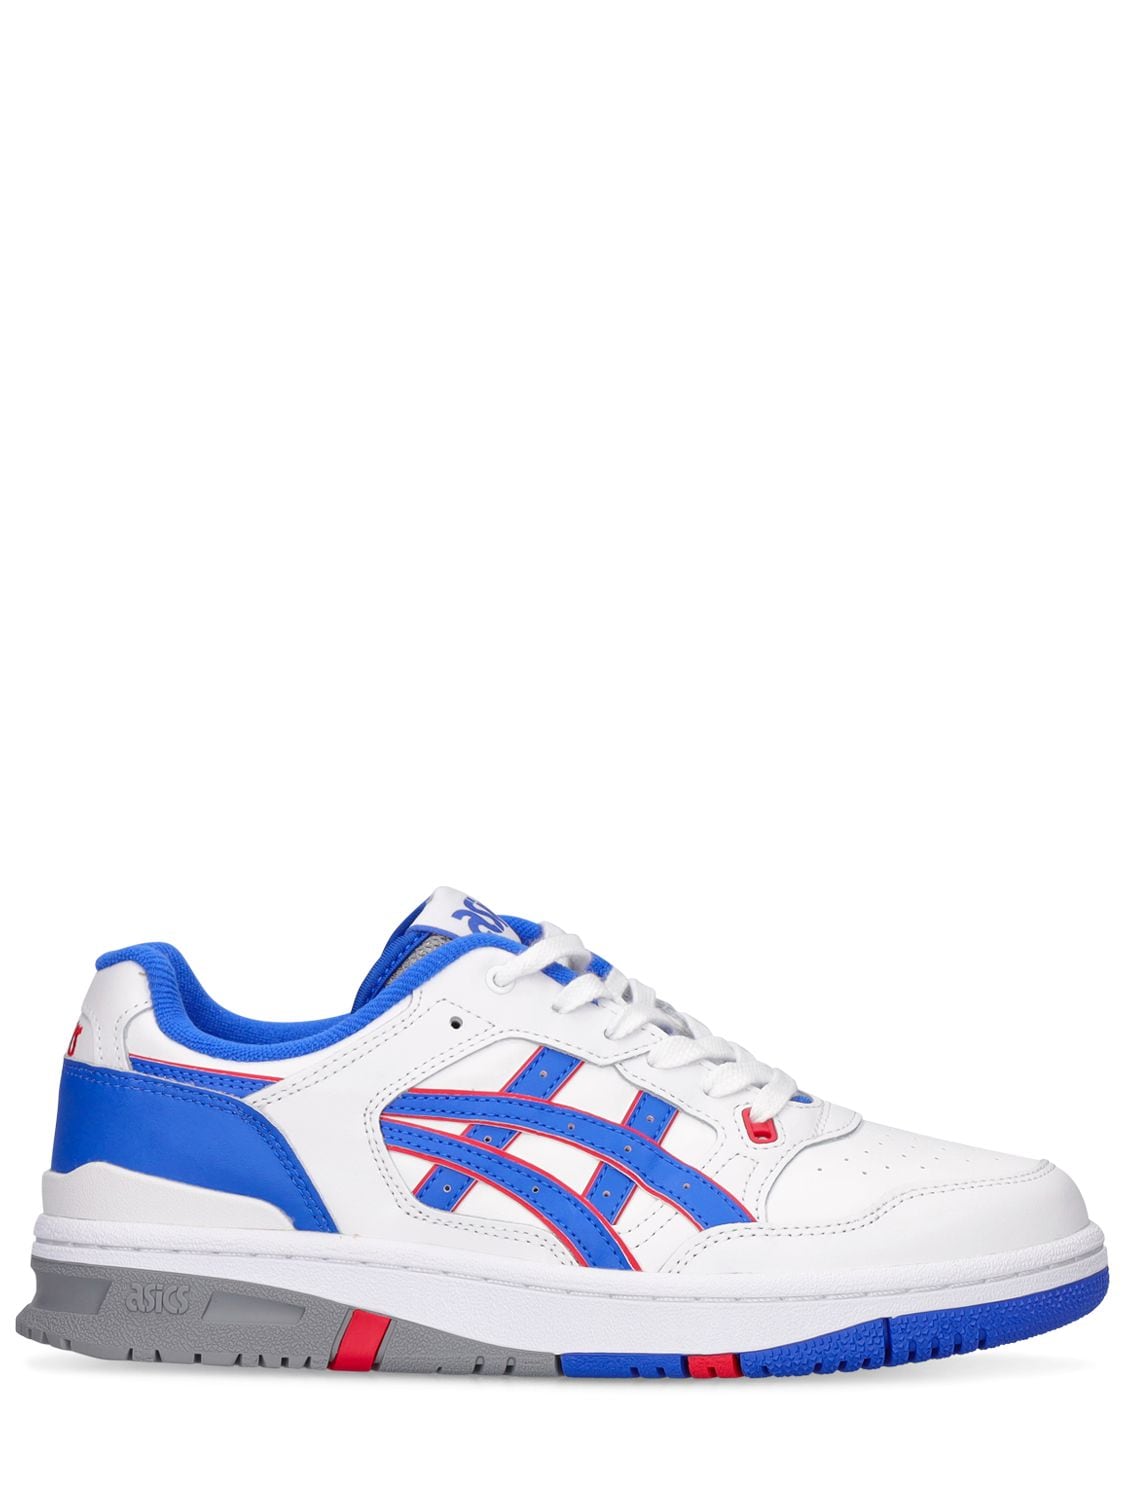 Asics Ex89 Sneakers In White